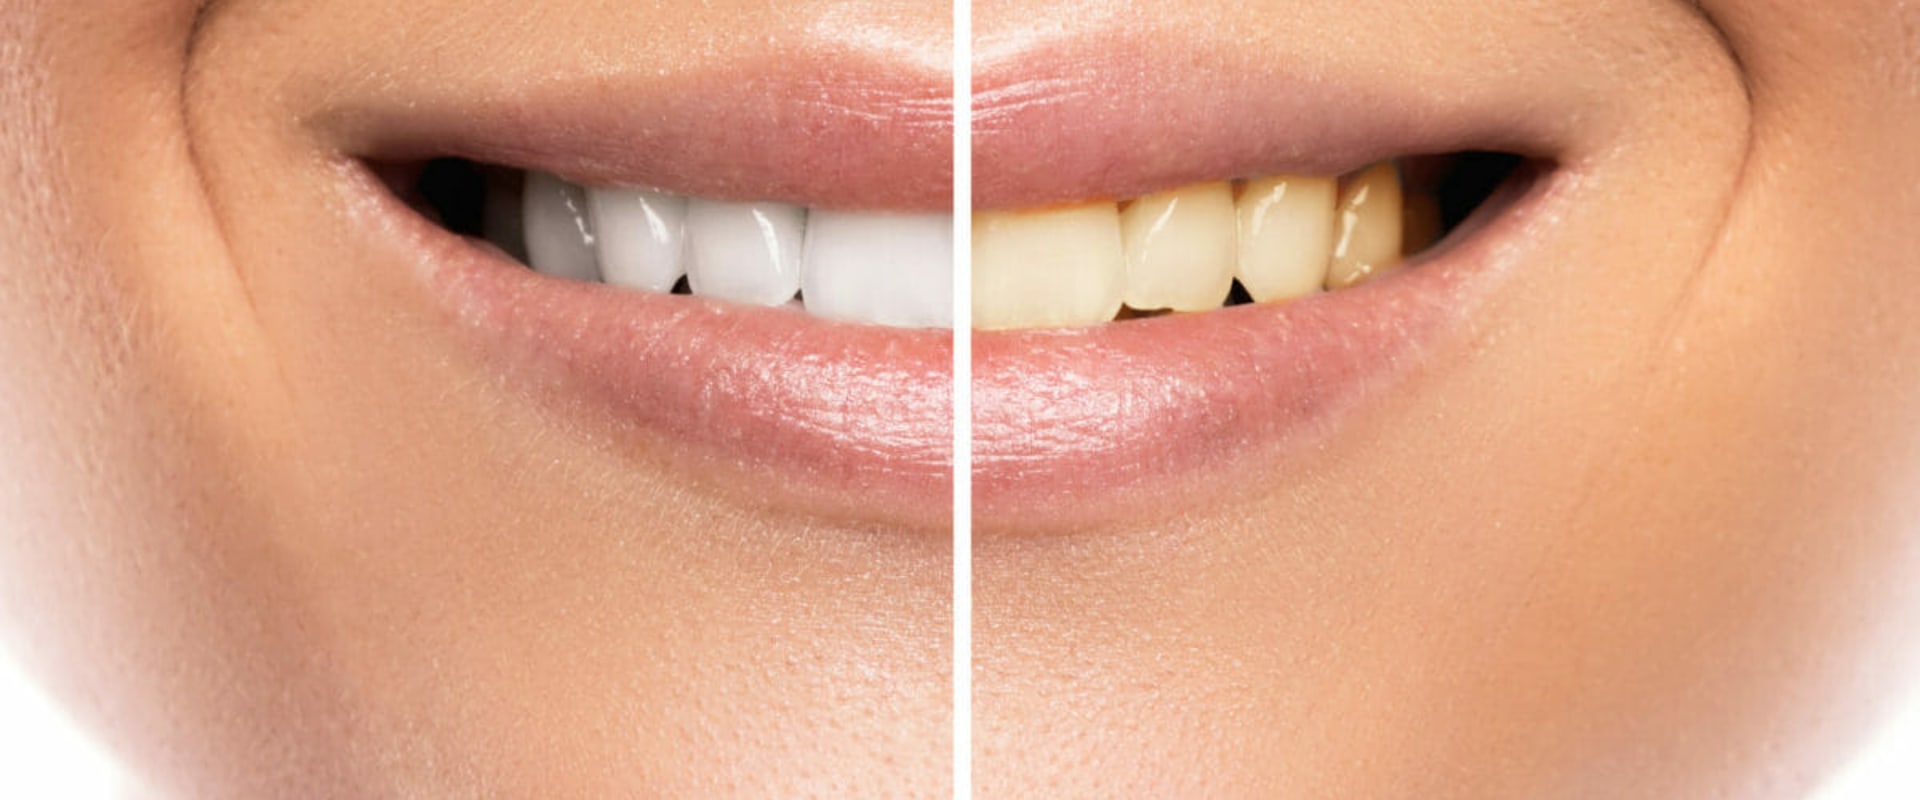 Boost Your Confidence: The Benefits of Teeth Whitening